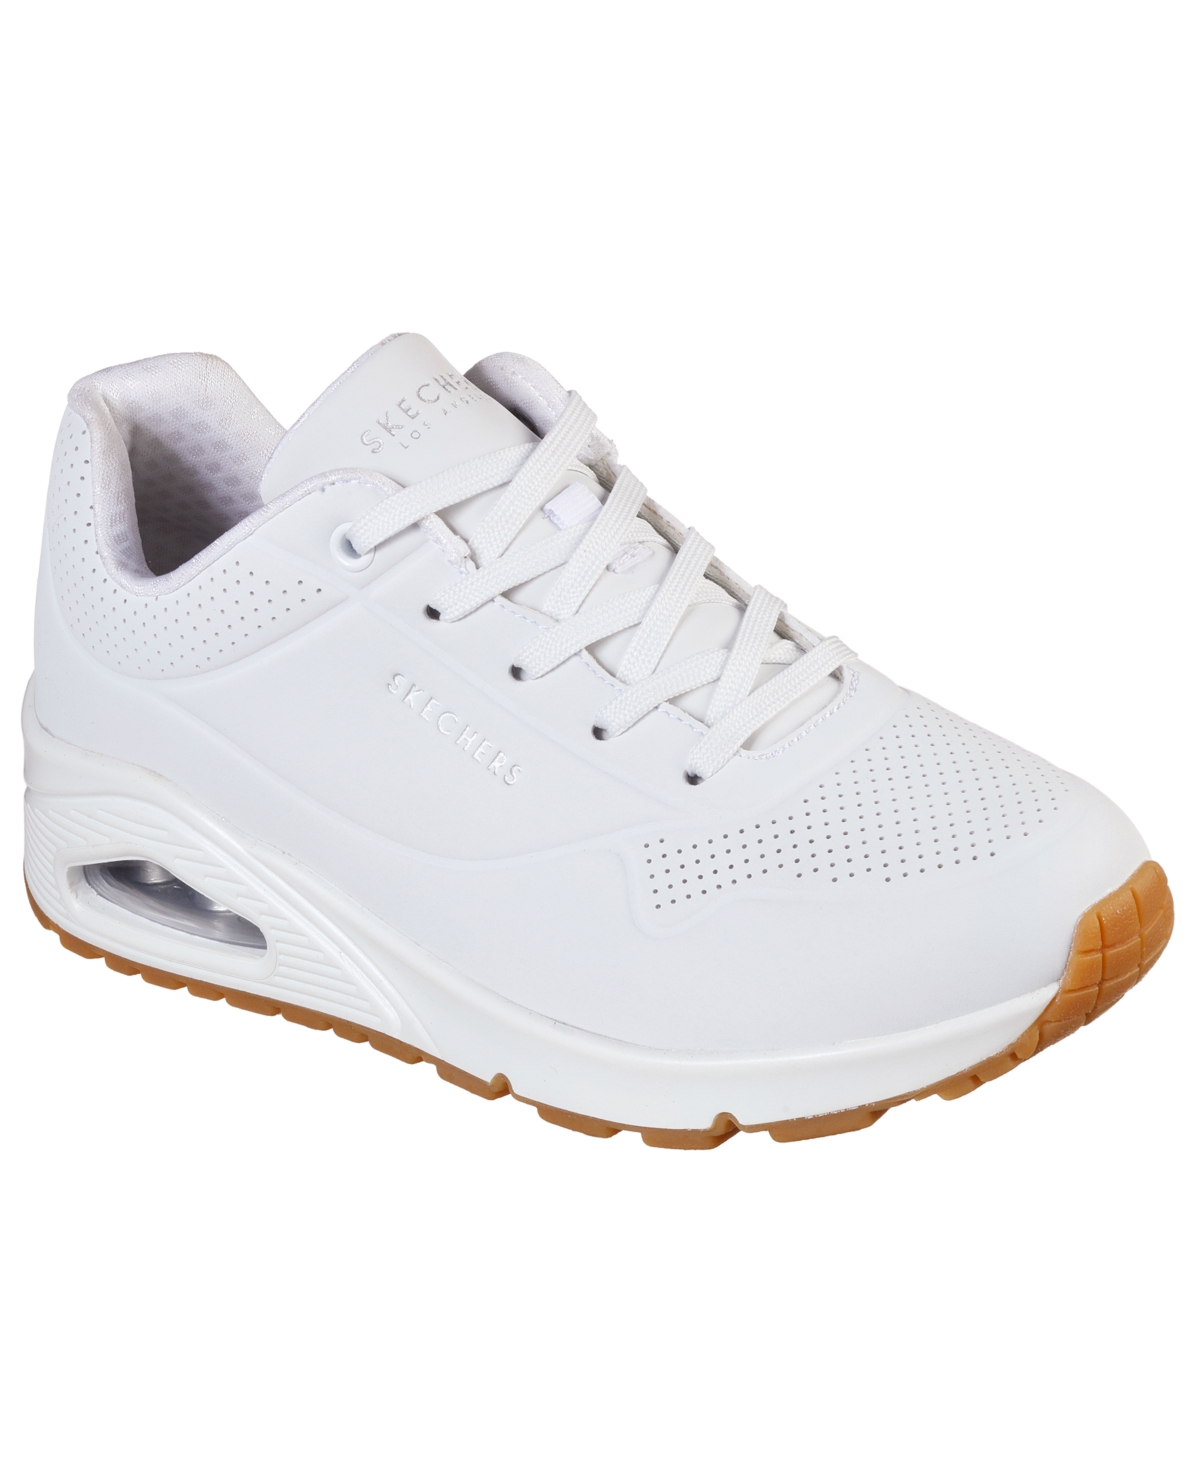 Women's Street Uno - Stand On Air Casual Sneakers from Finish Line - White